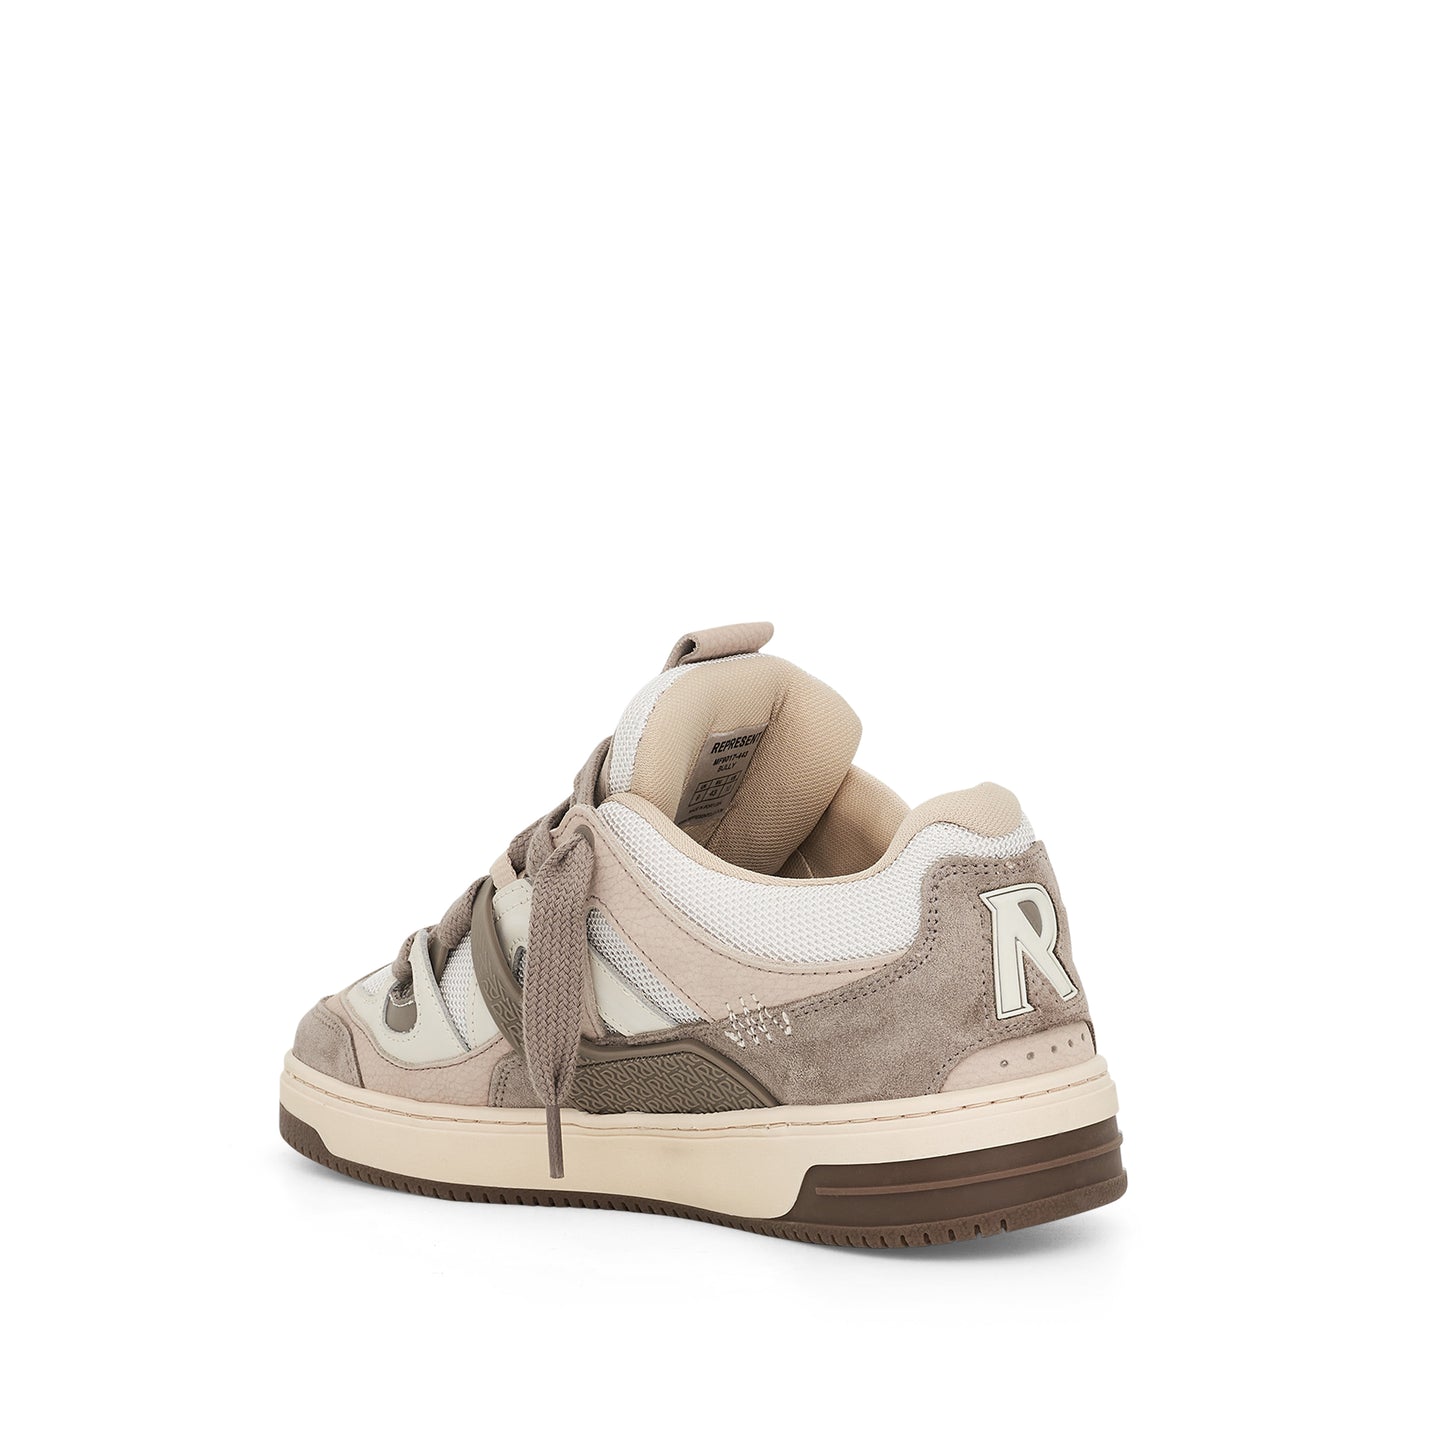 Bully Low Top Sneaker in Washed Taupe